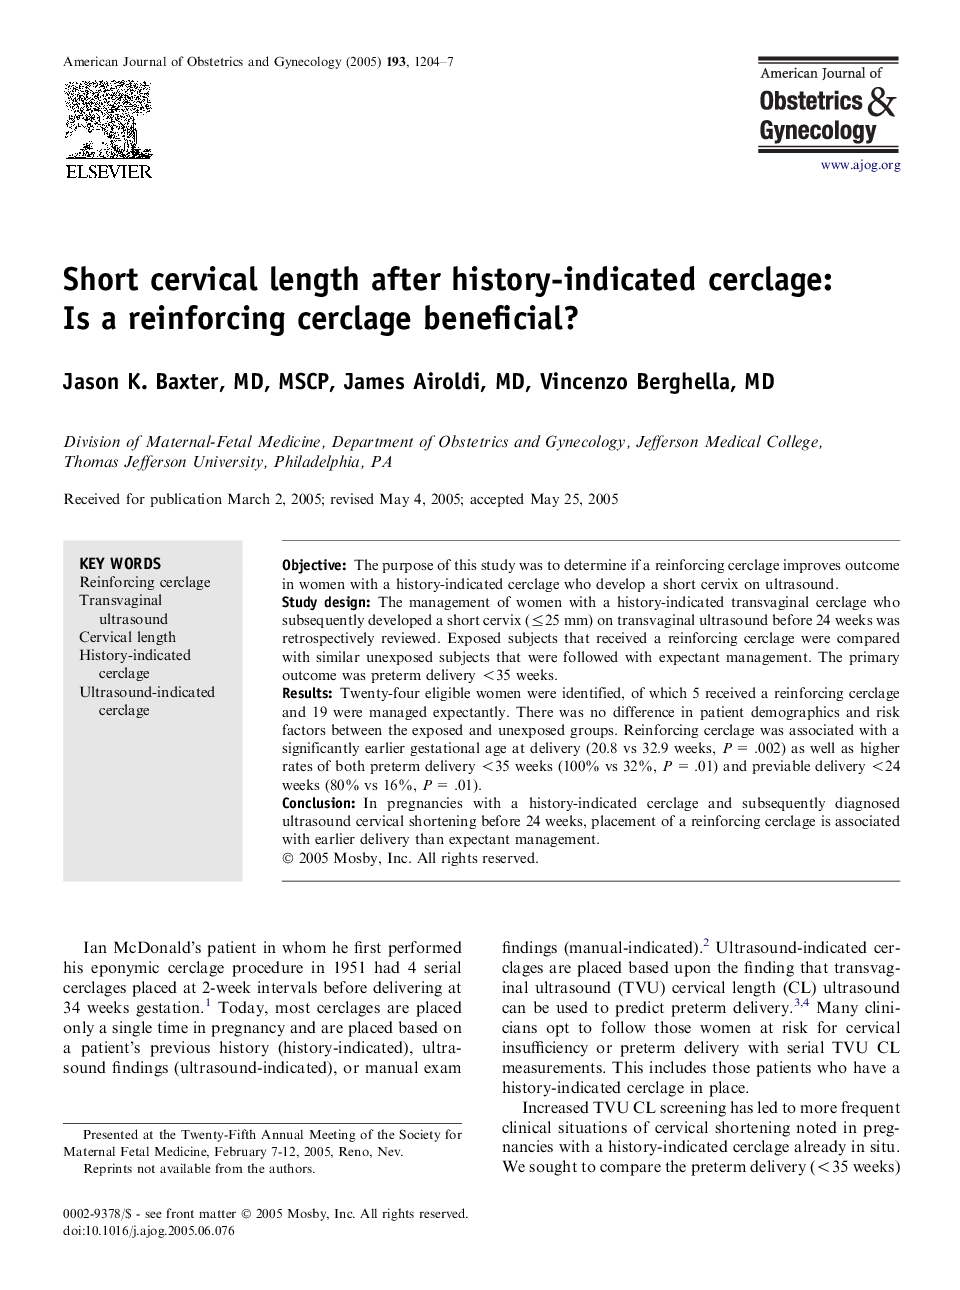 Short cervical length after history-indicated cerclage: Is a reinforcing cerclage beneficial?